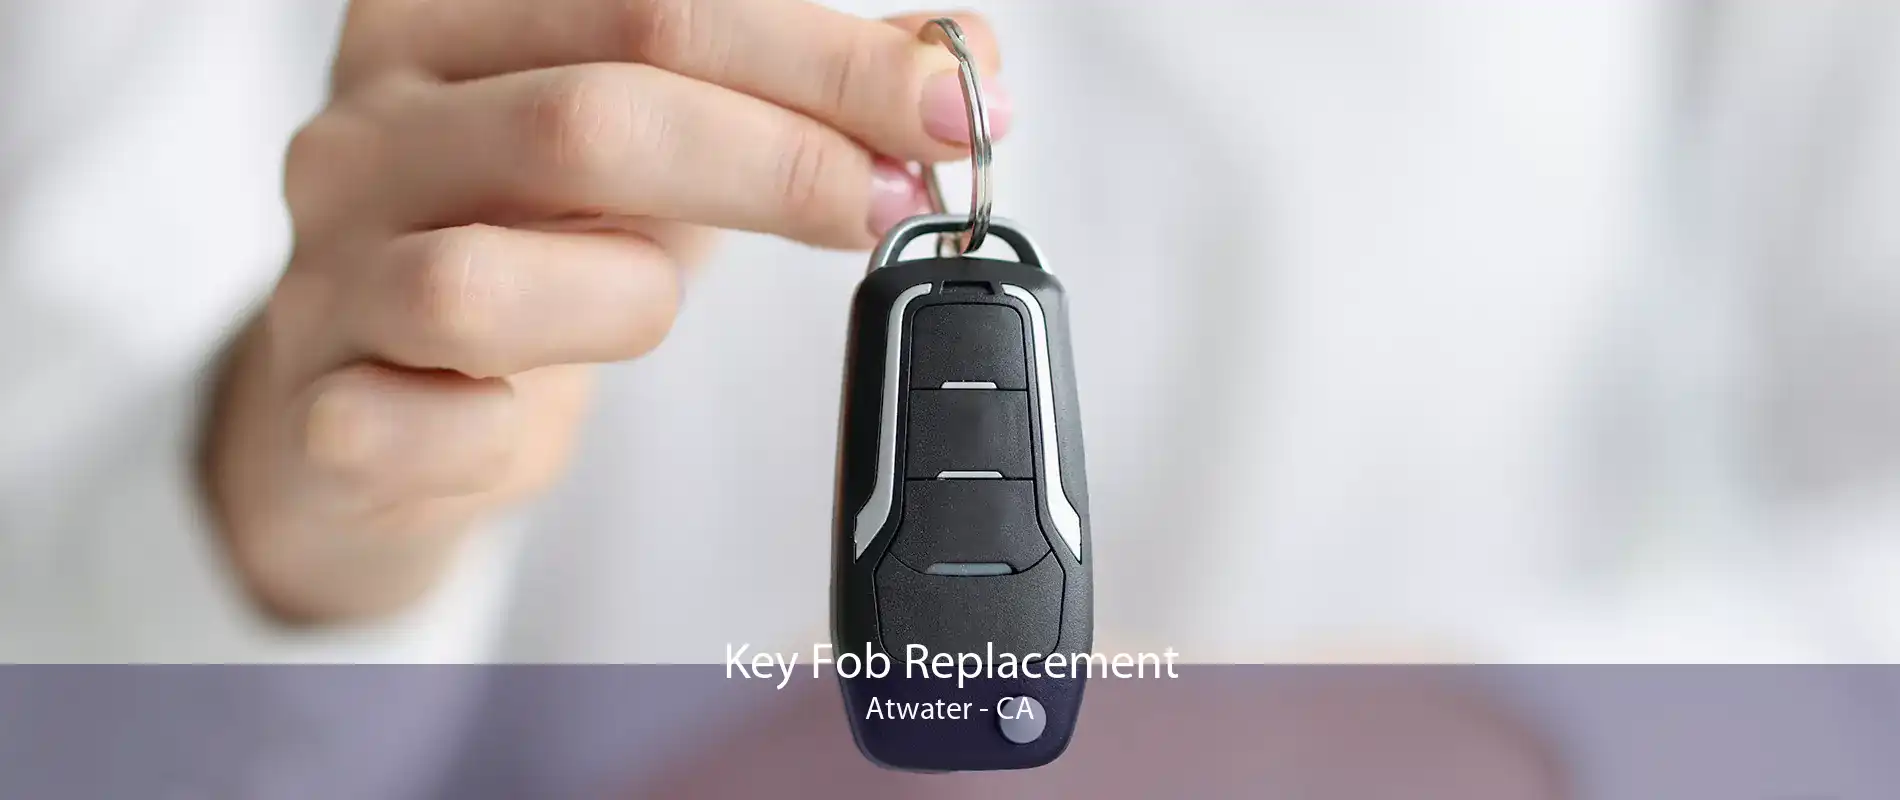 Key Fob Replacement Atwater - CA